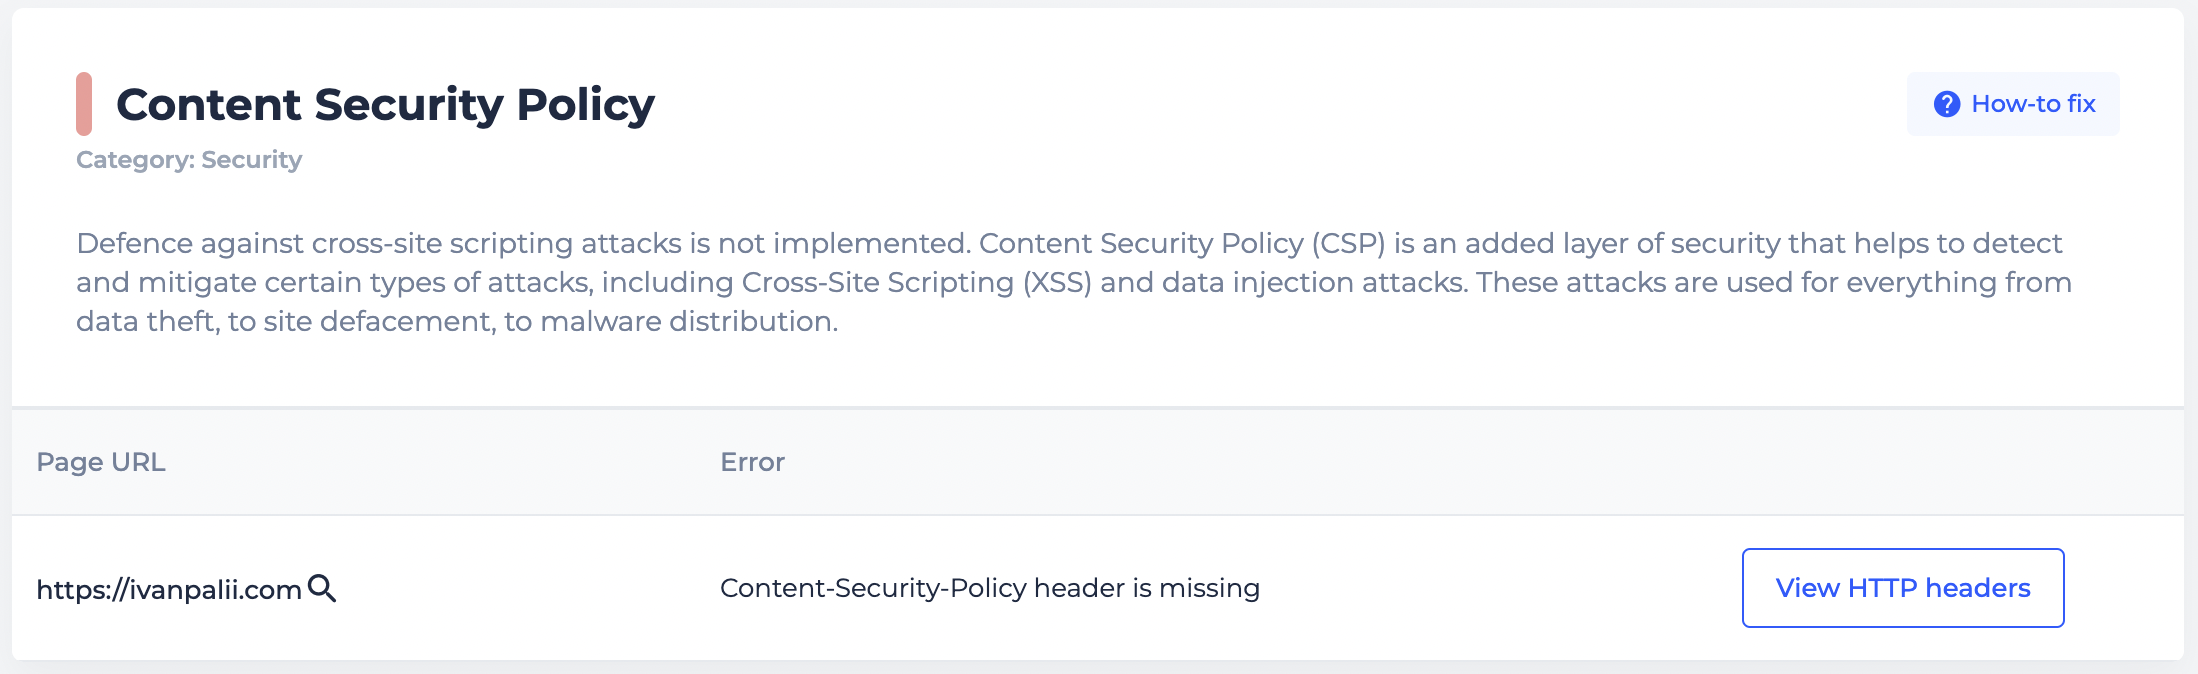 Content Security Policy issue in-depth